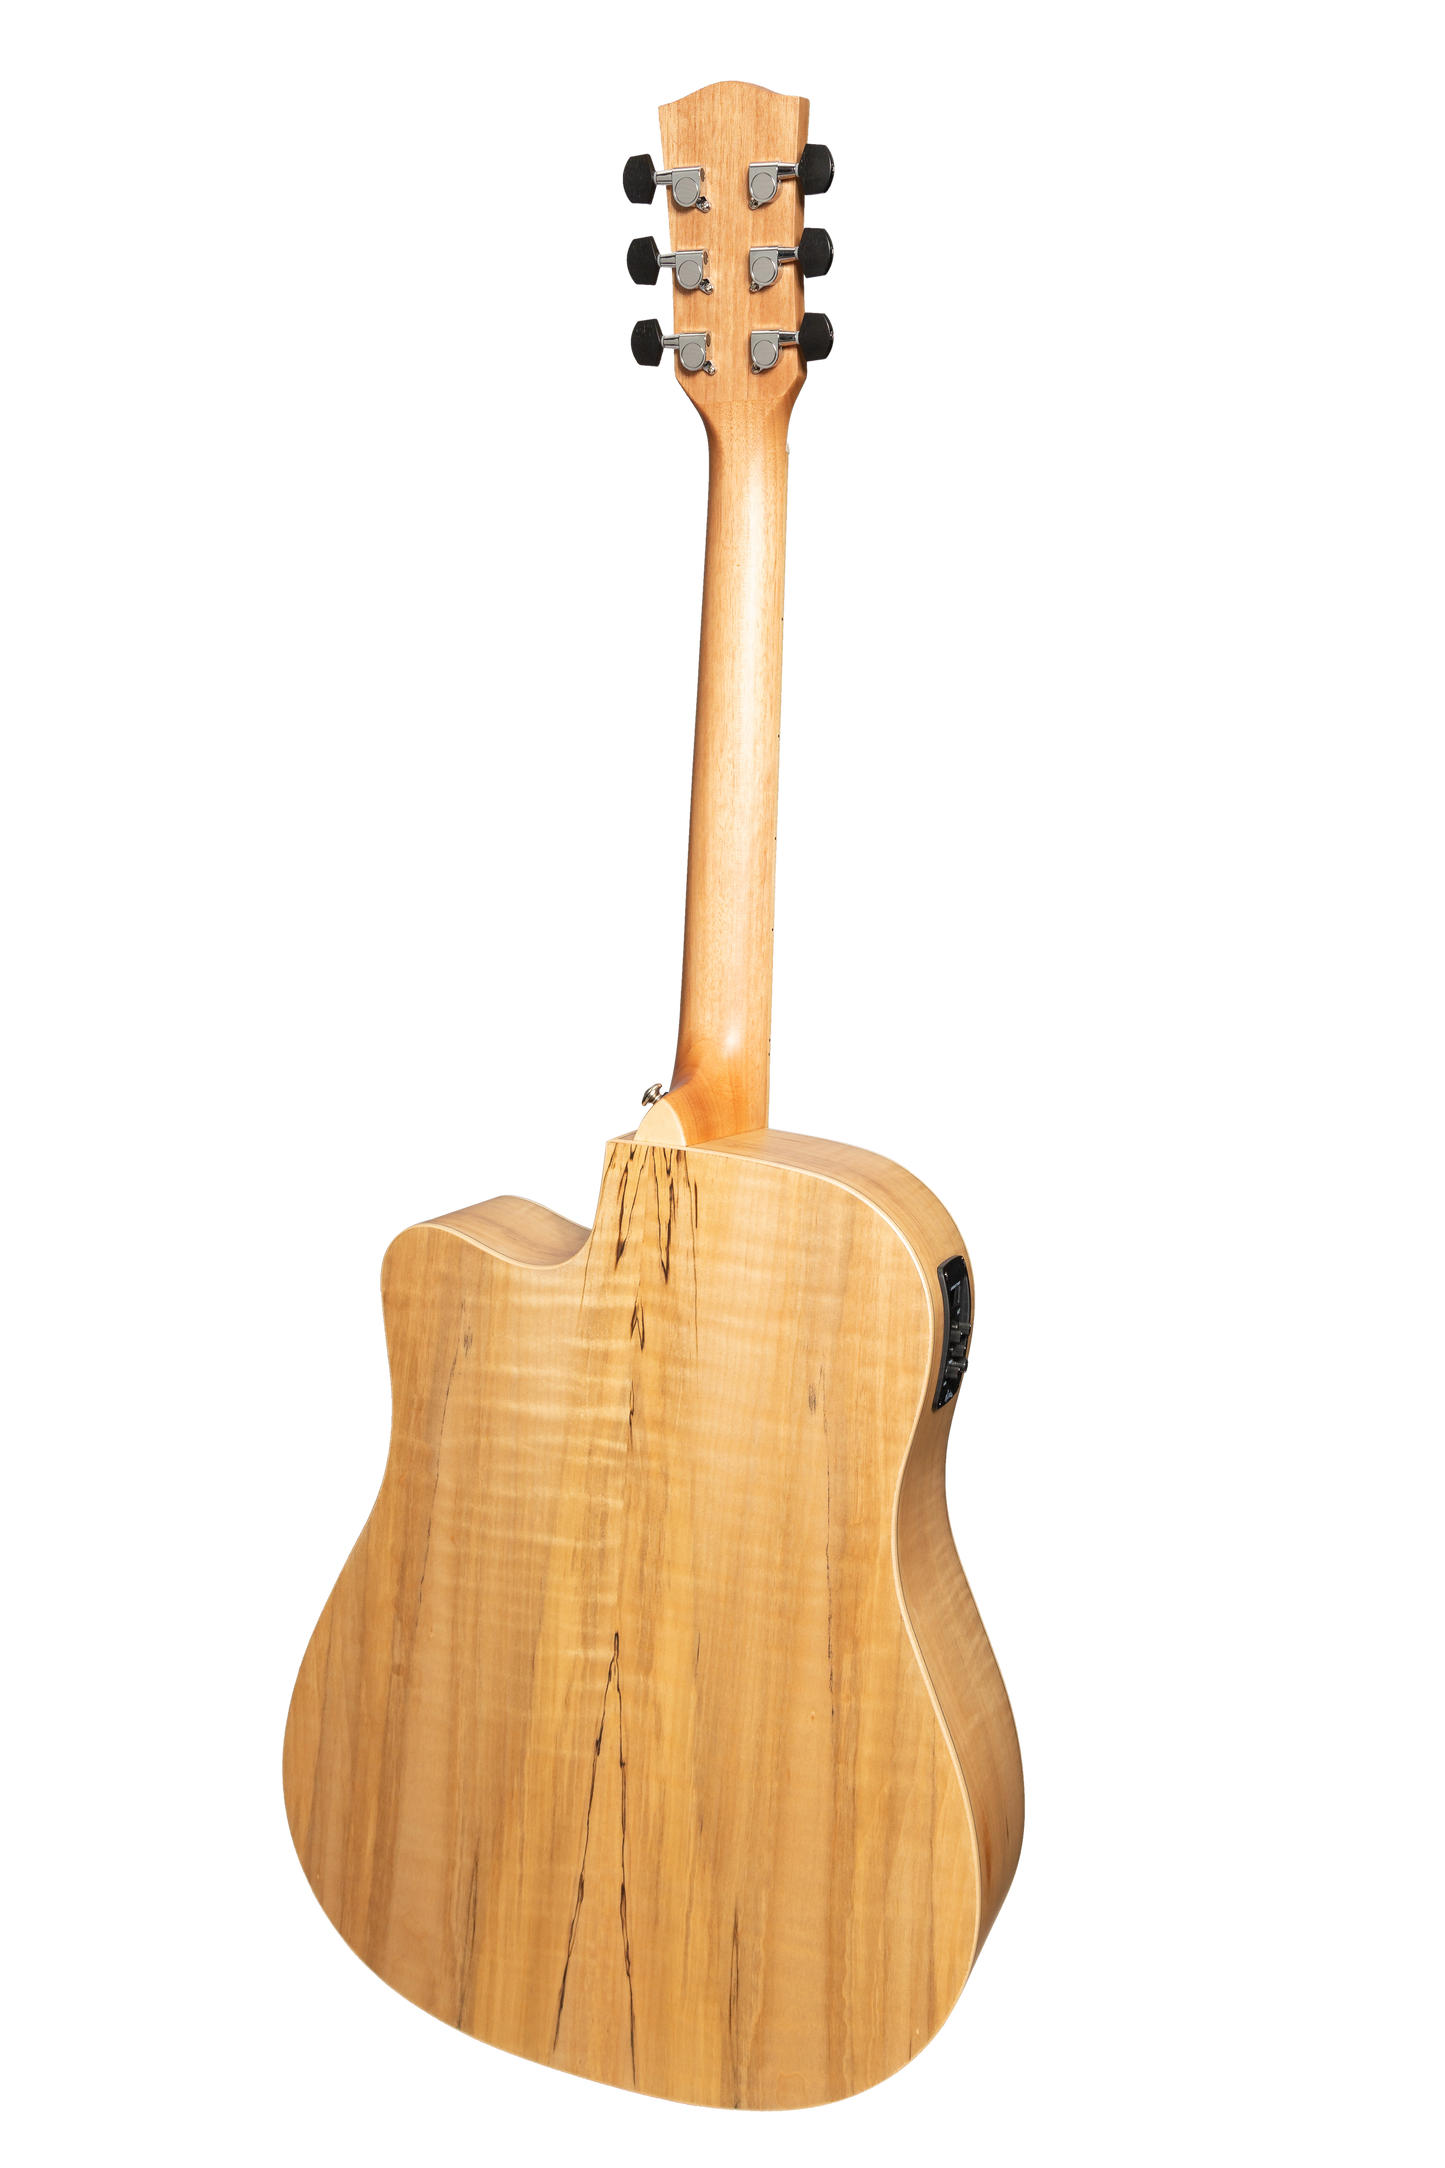 Martinez '31 Series' Spalted Maple Acoustic-Electric Dreadnought Cutaway Guitar (Natural Satin)